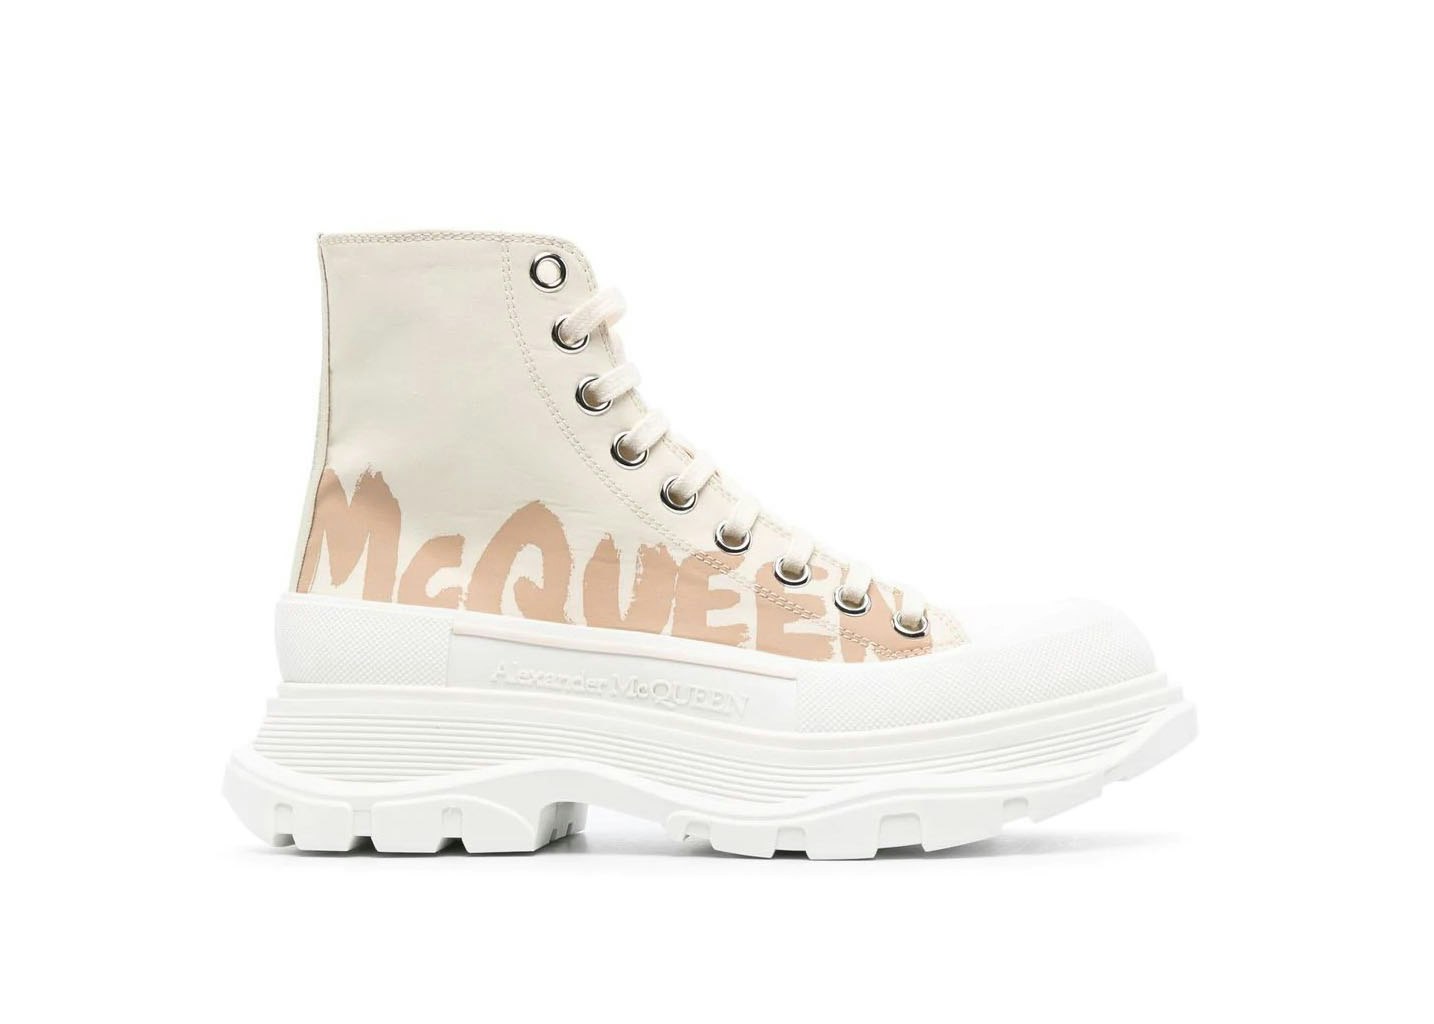 Black Oversize Sneakers With White Spoiler And Sole - ALEXANDER MCQUEEN -  Russocapri